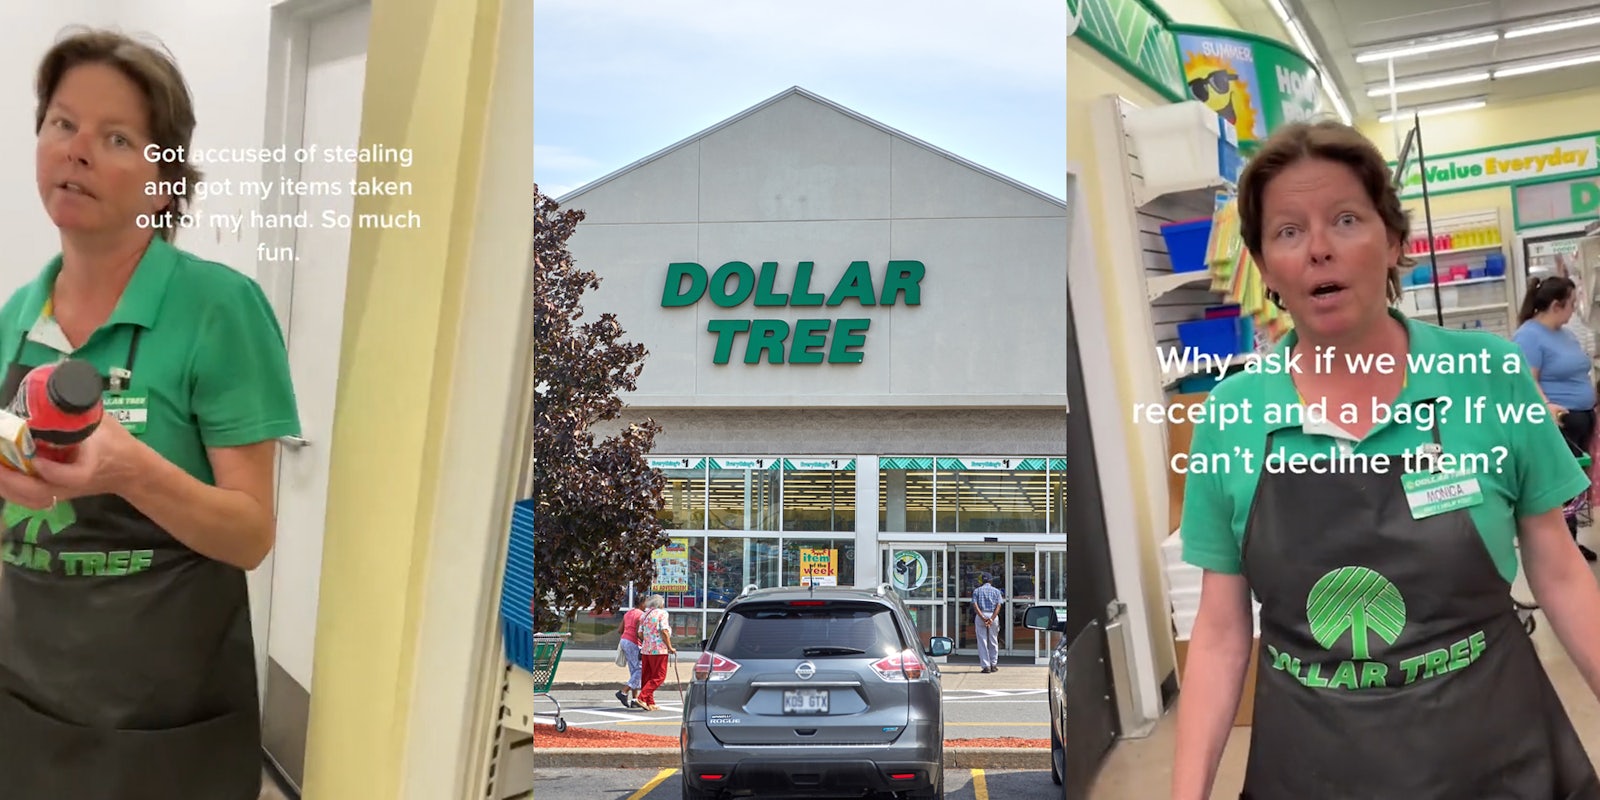 Dollar Tree worker with caption 'Got accused of stealing and got my items taken out of my hand. So much fun.' (l) Dollar Tree building with sign (c) Dollar Tree worker with caption 'Why ask if we want a receipt and a bag? If we can't decline them' (r)